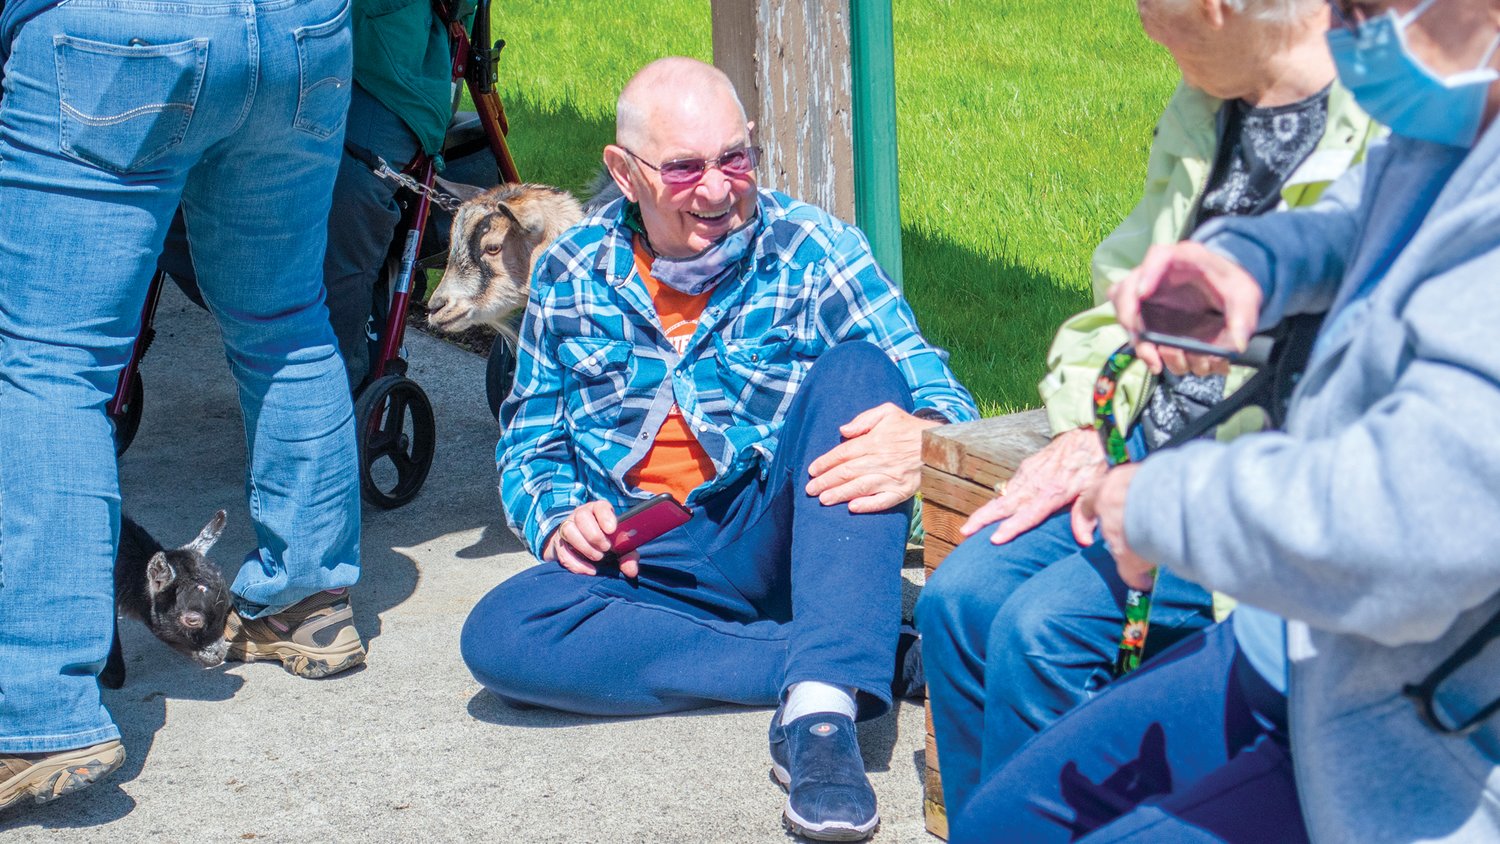 Jerry Blanchard smiles while sitting on the ground next to pygmy goats at Woodland Village Concepts of Chehalis Thursday afternoon.